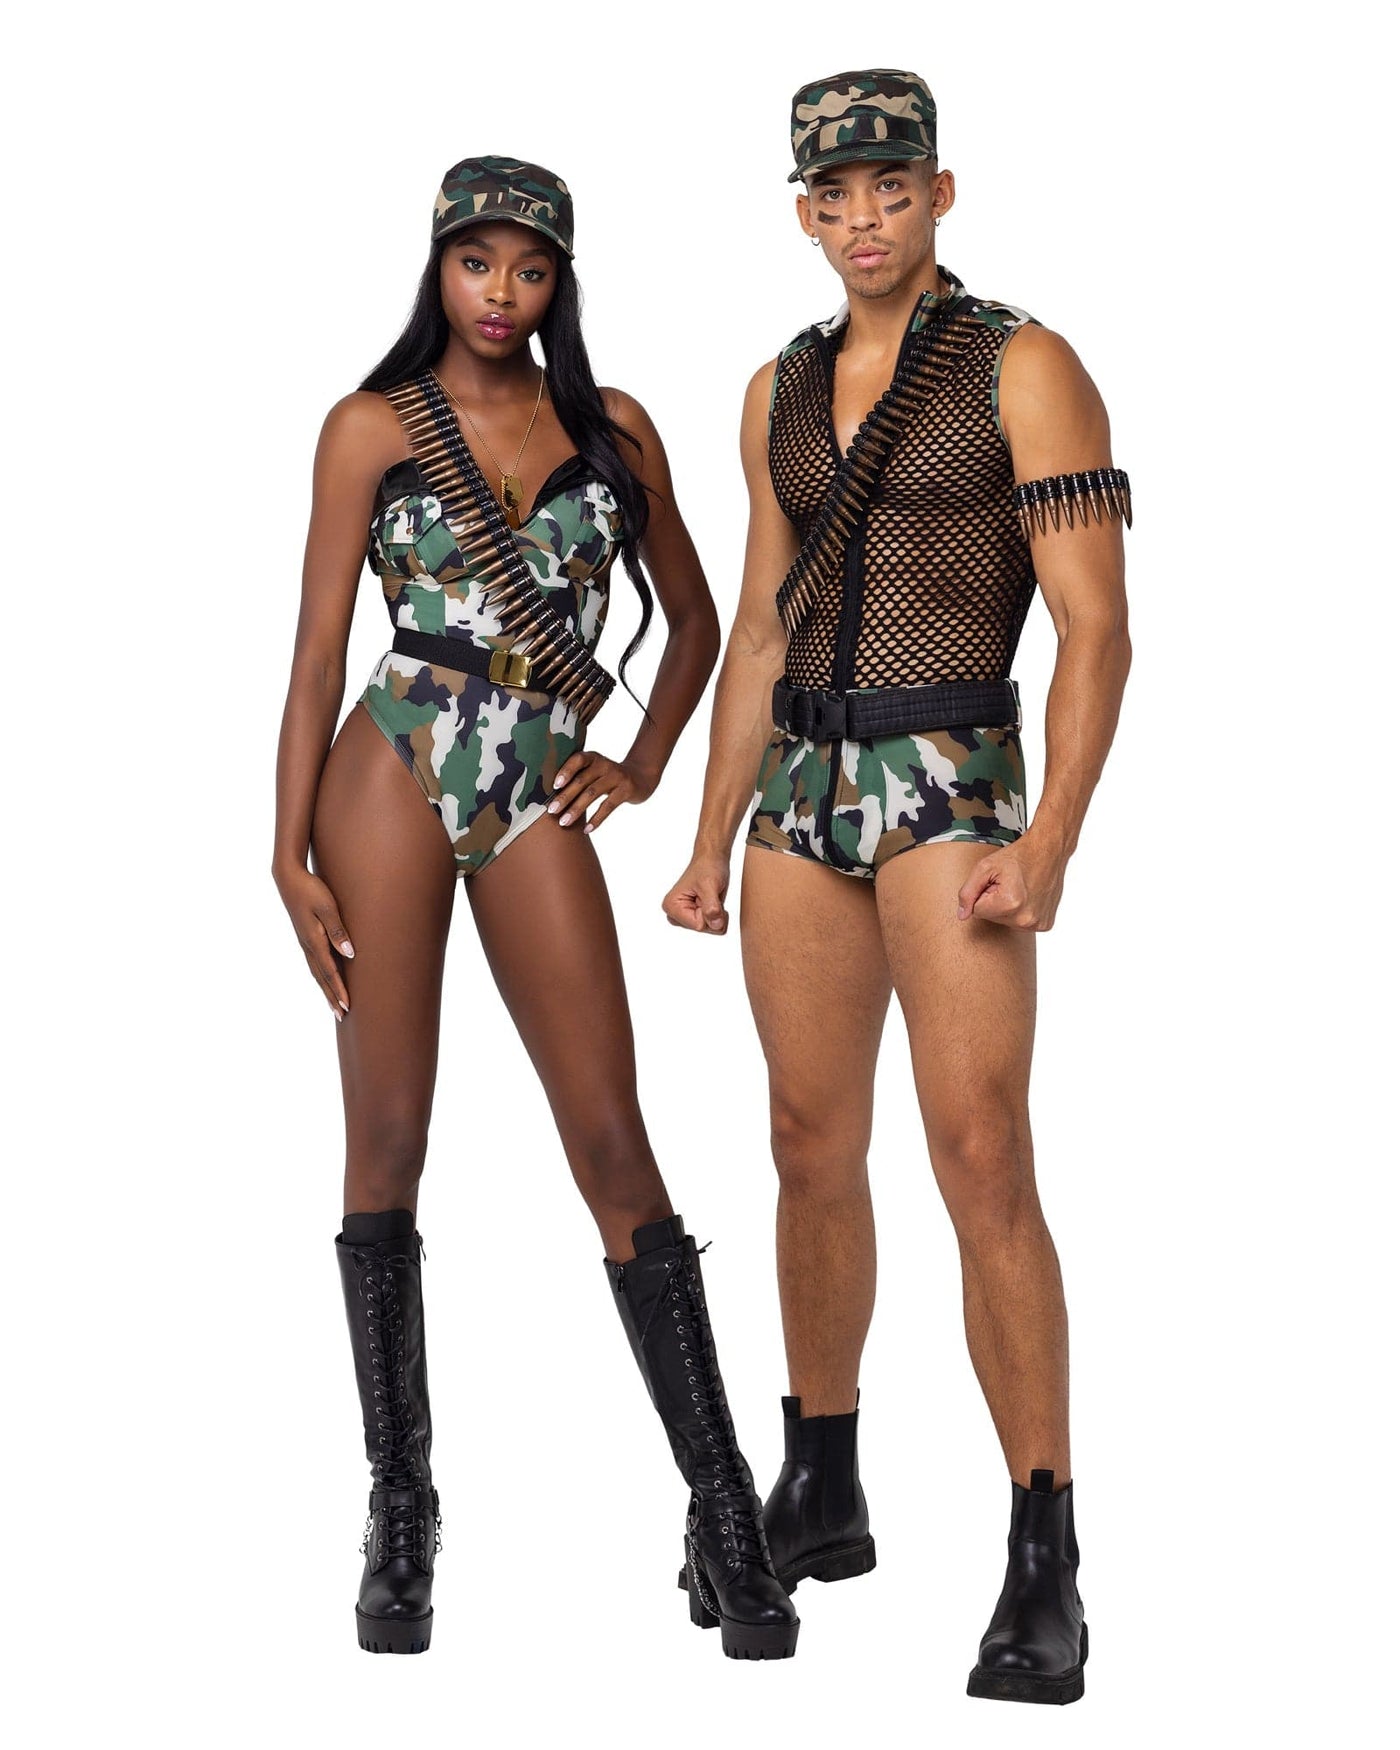 3pc. Sergeant Stud Army Men's Costume - For Love of Lingerie